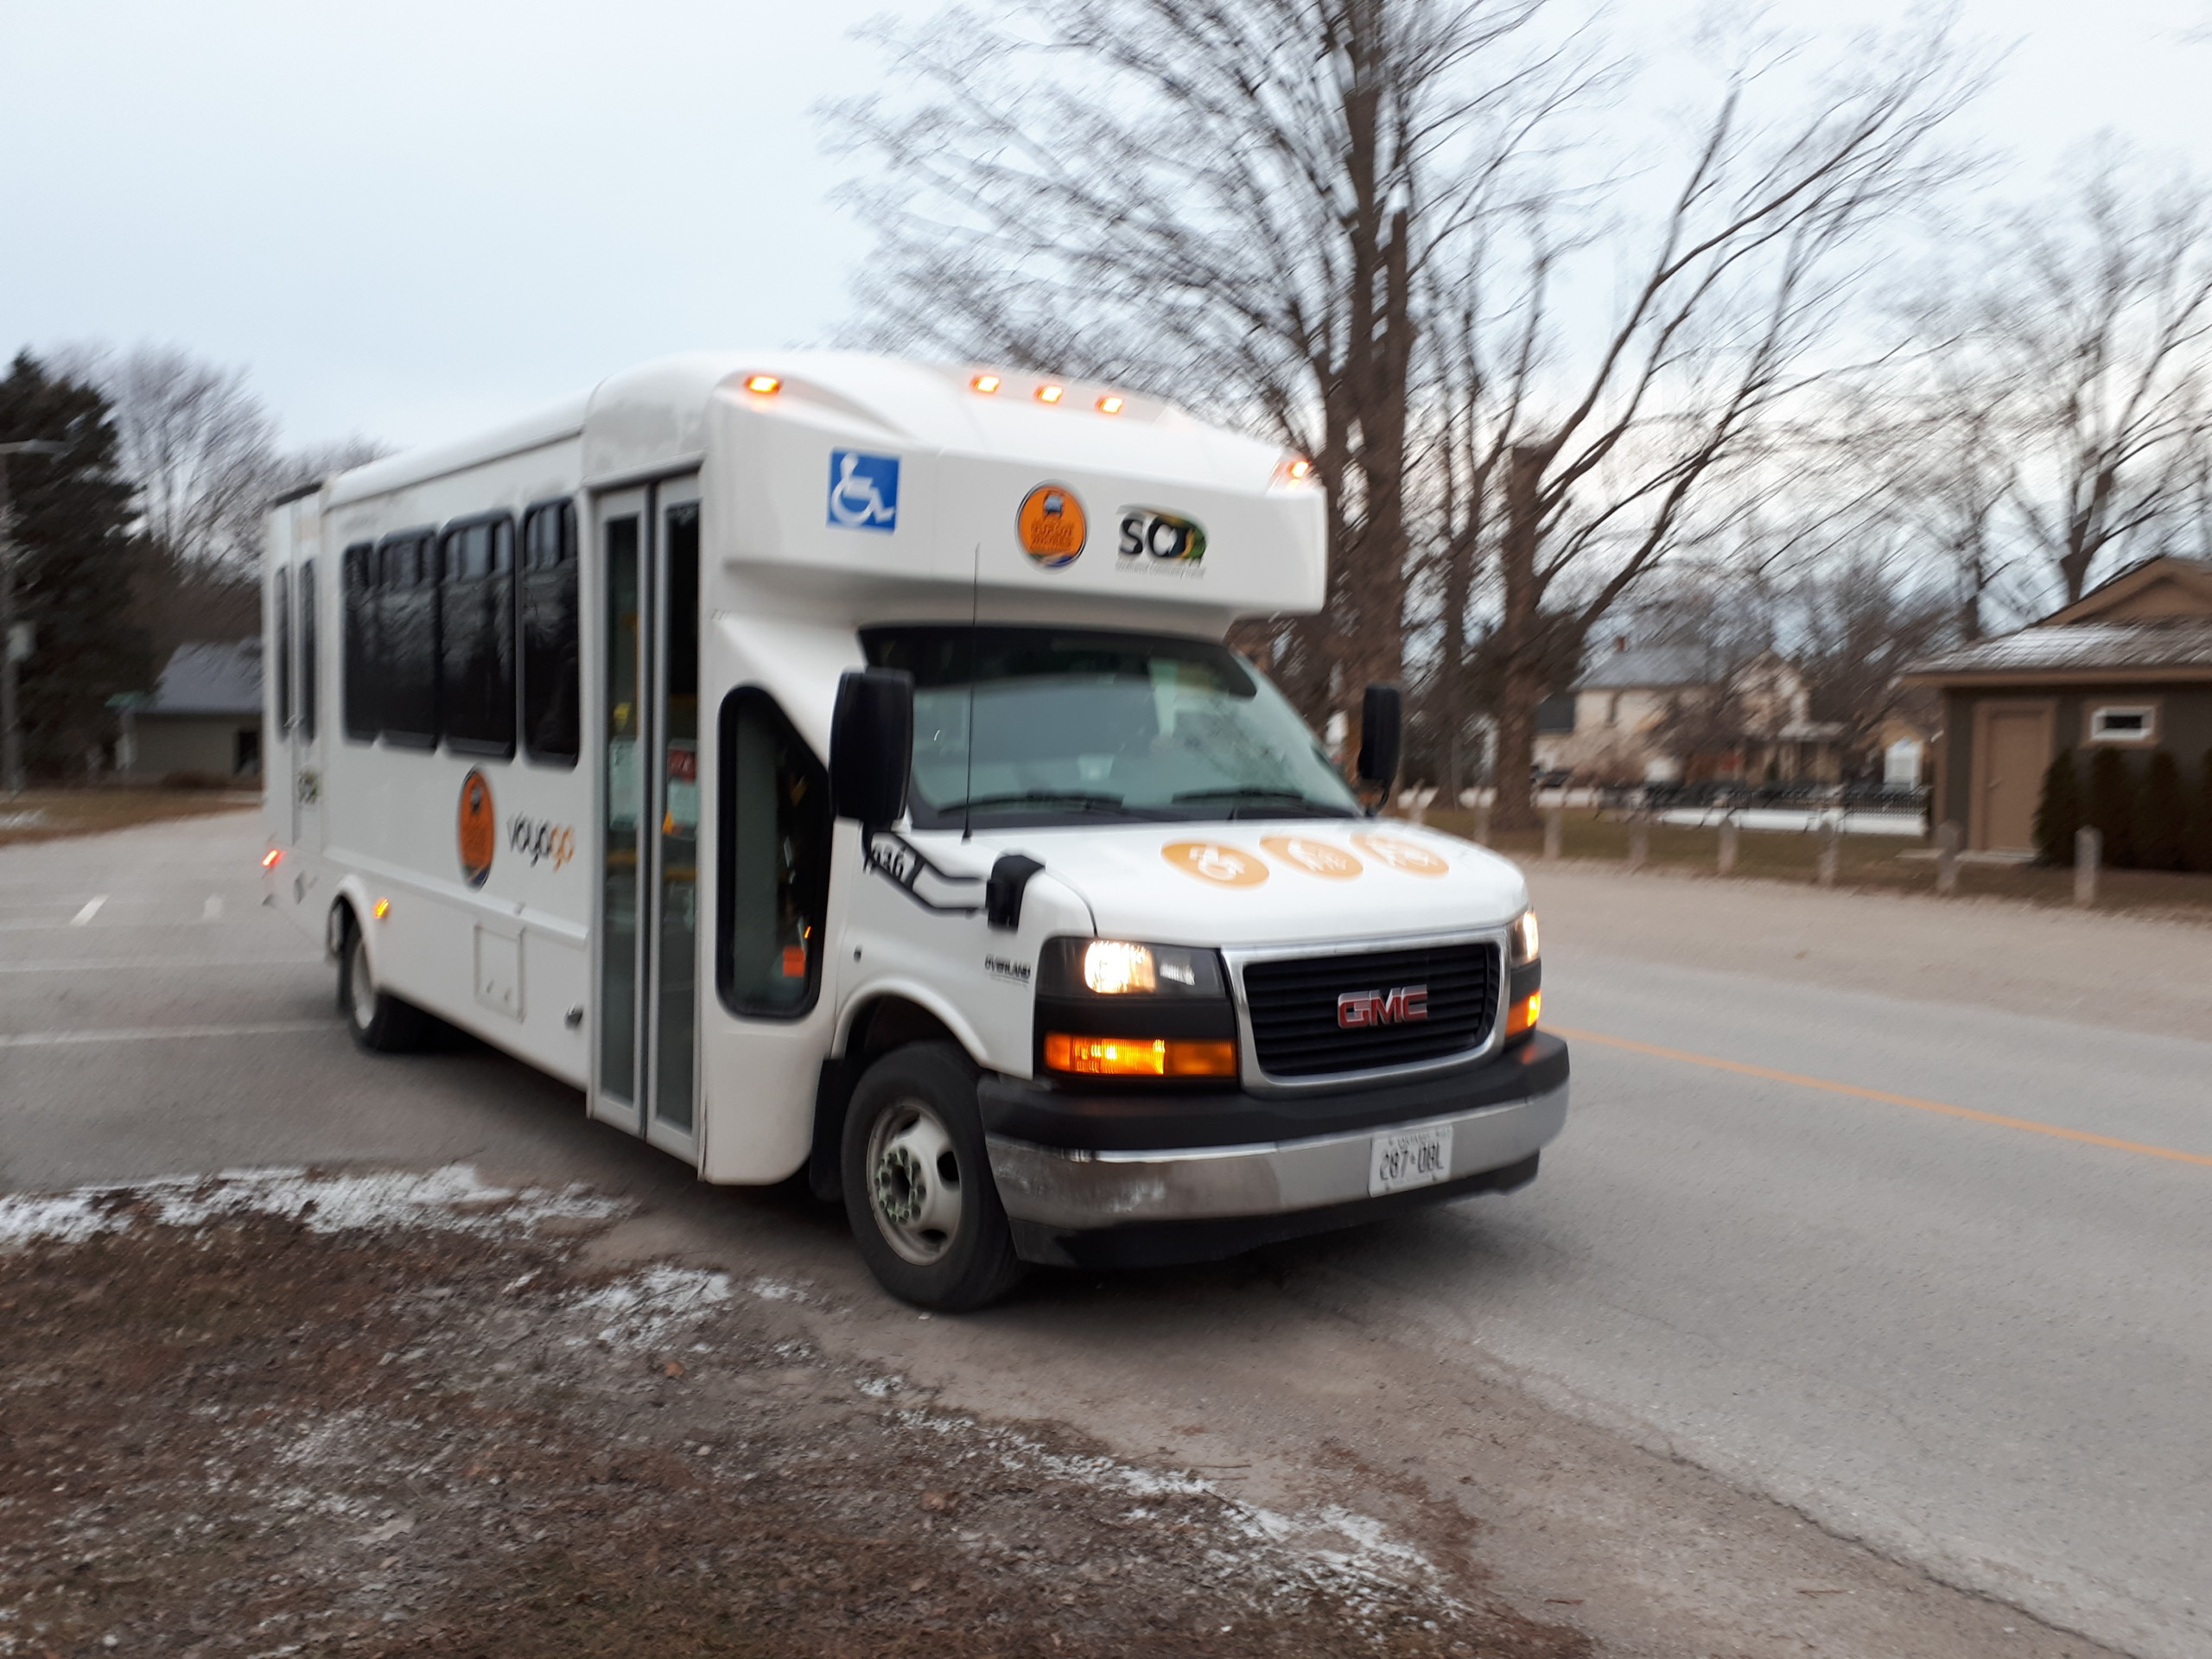 Security cameras installed on local transit service buses